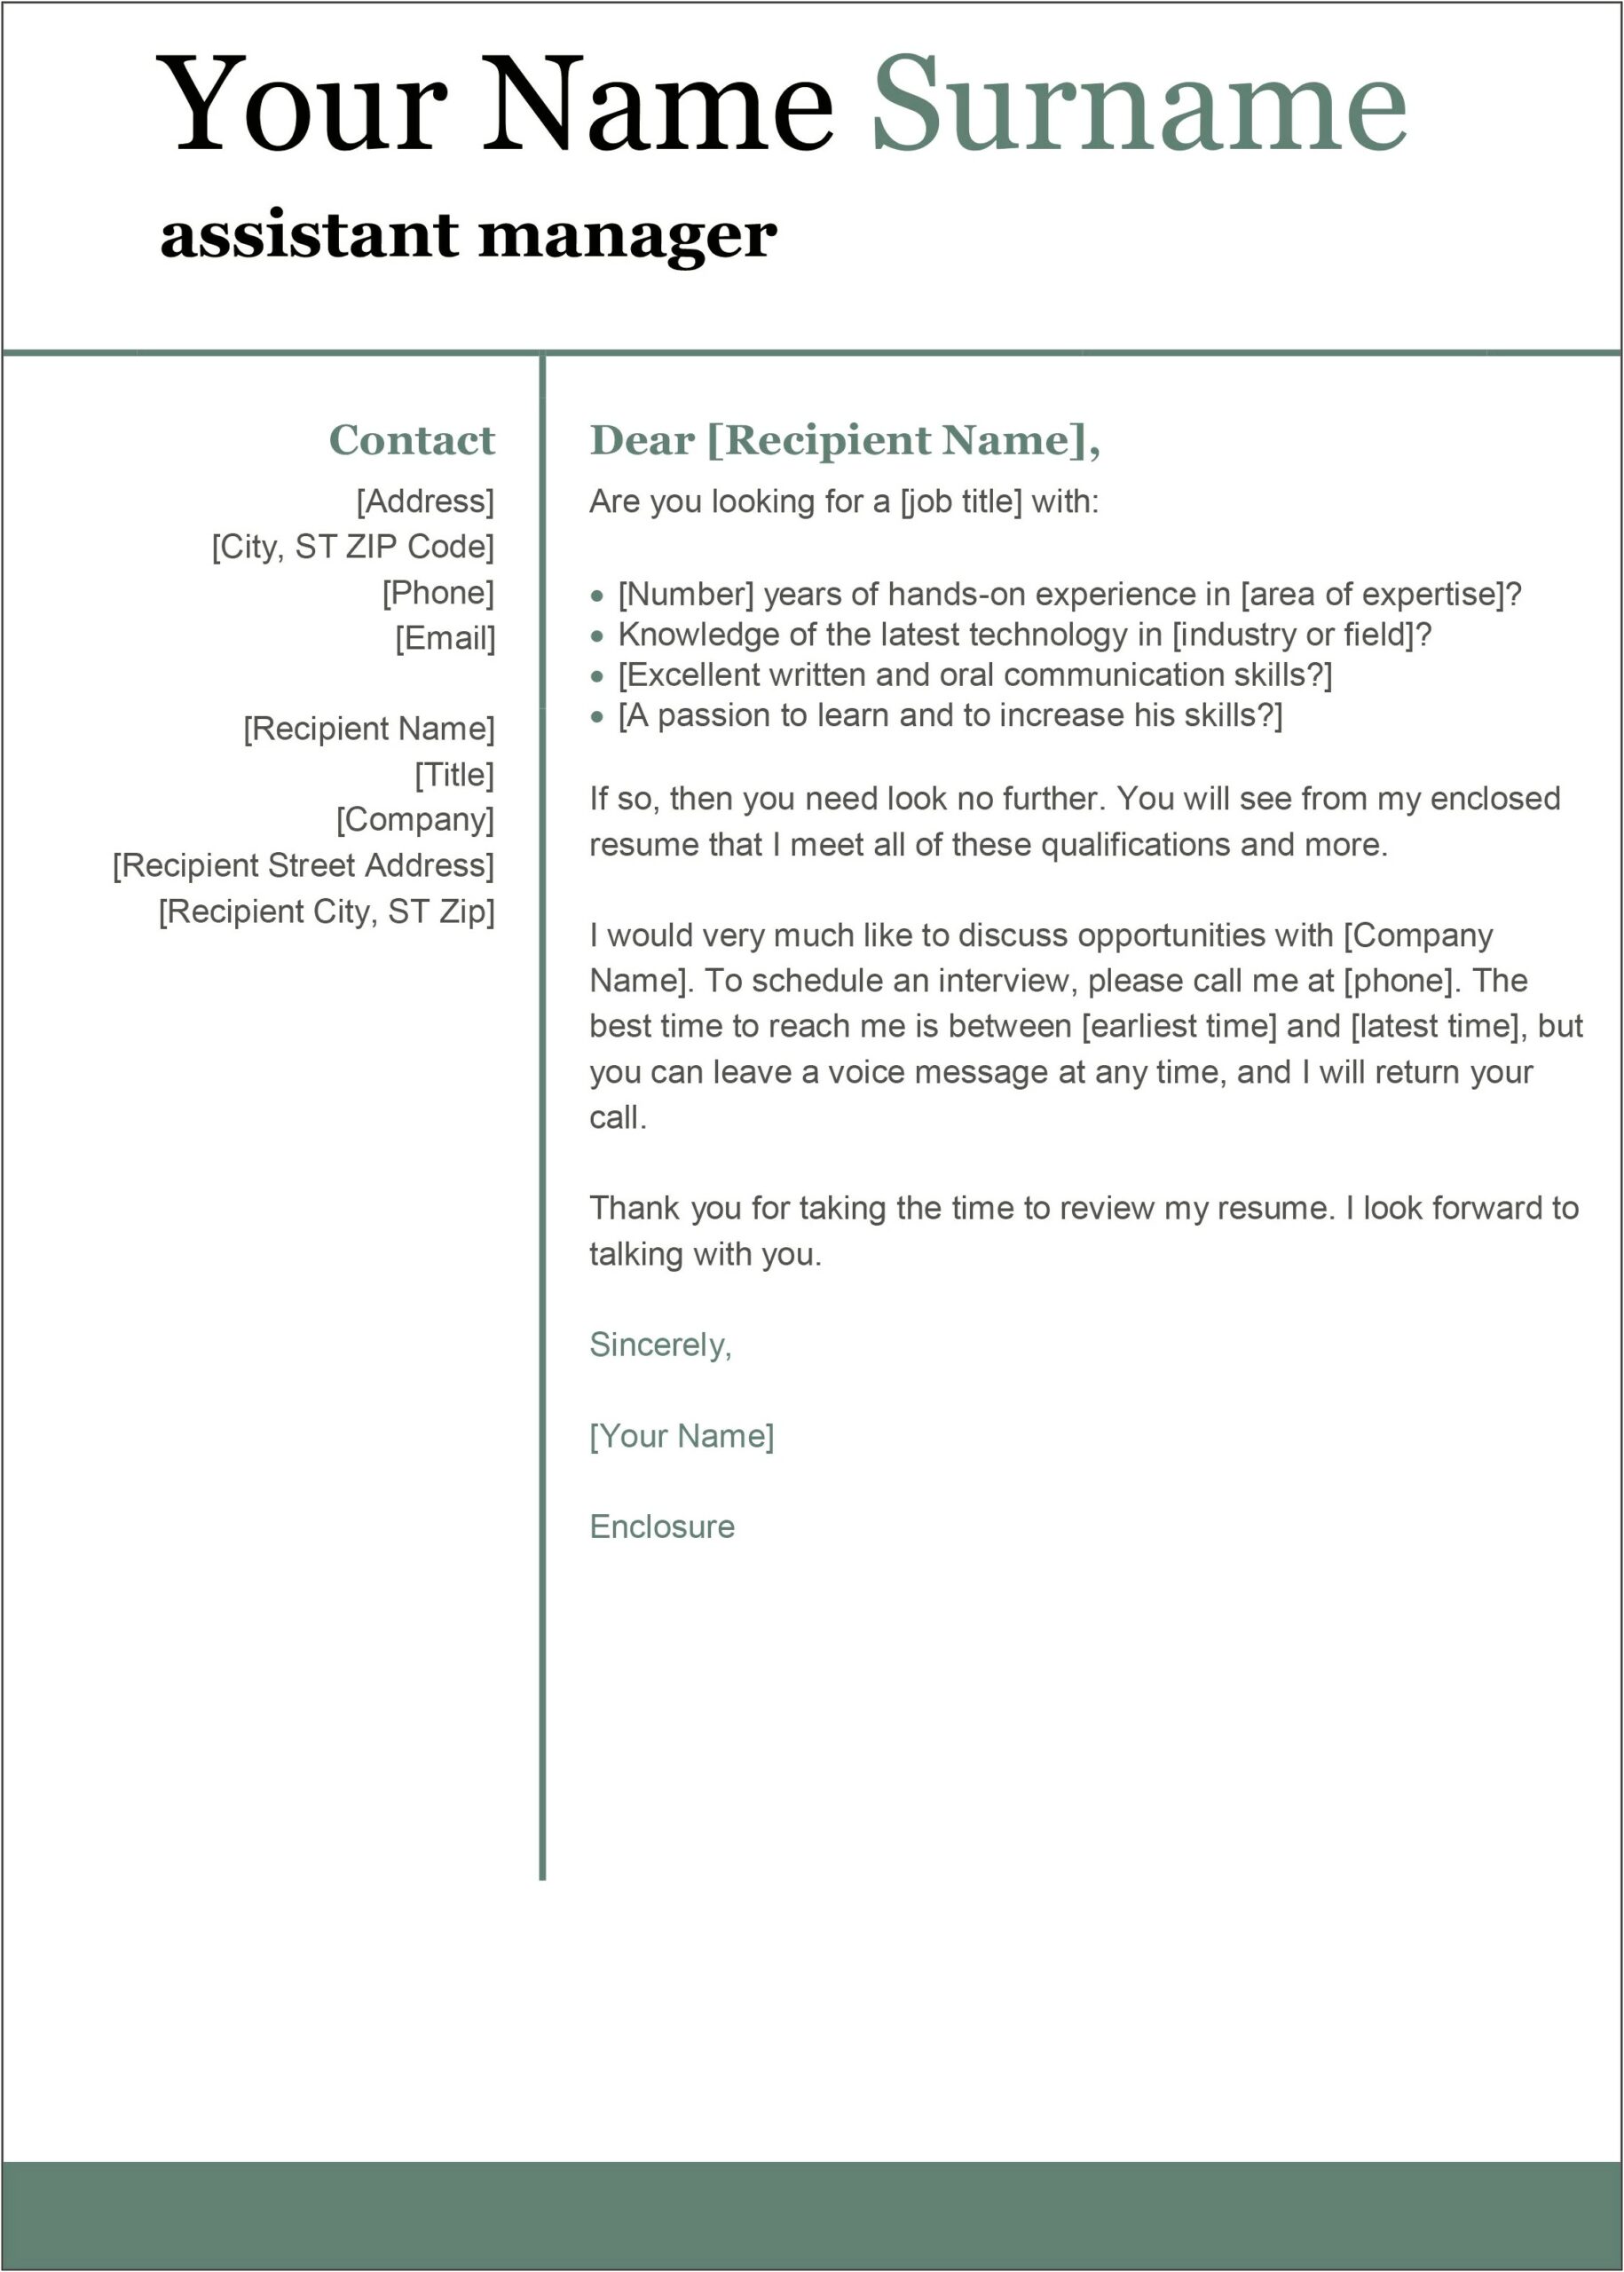 Microsoft Office Word 2010 Cover Letter Template